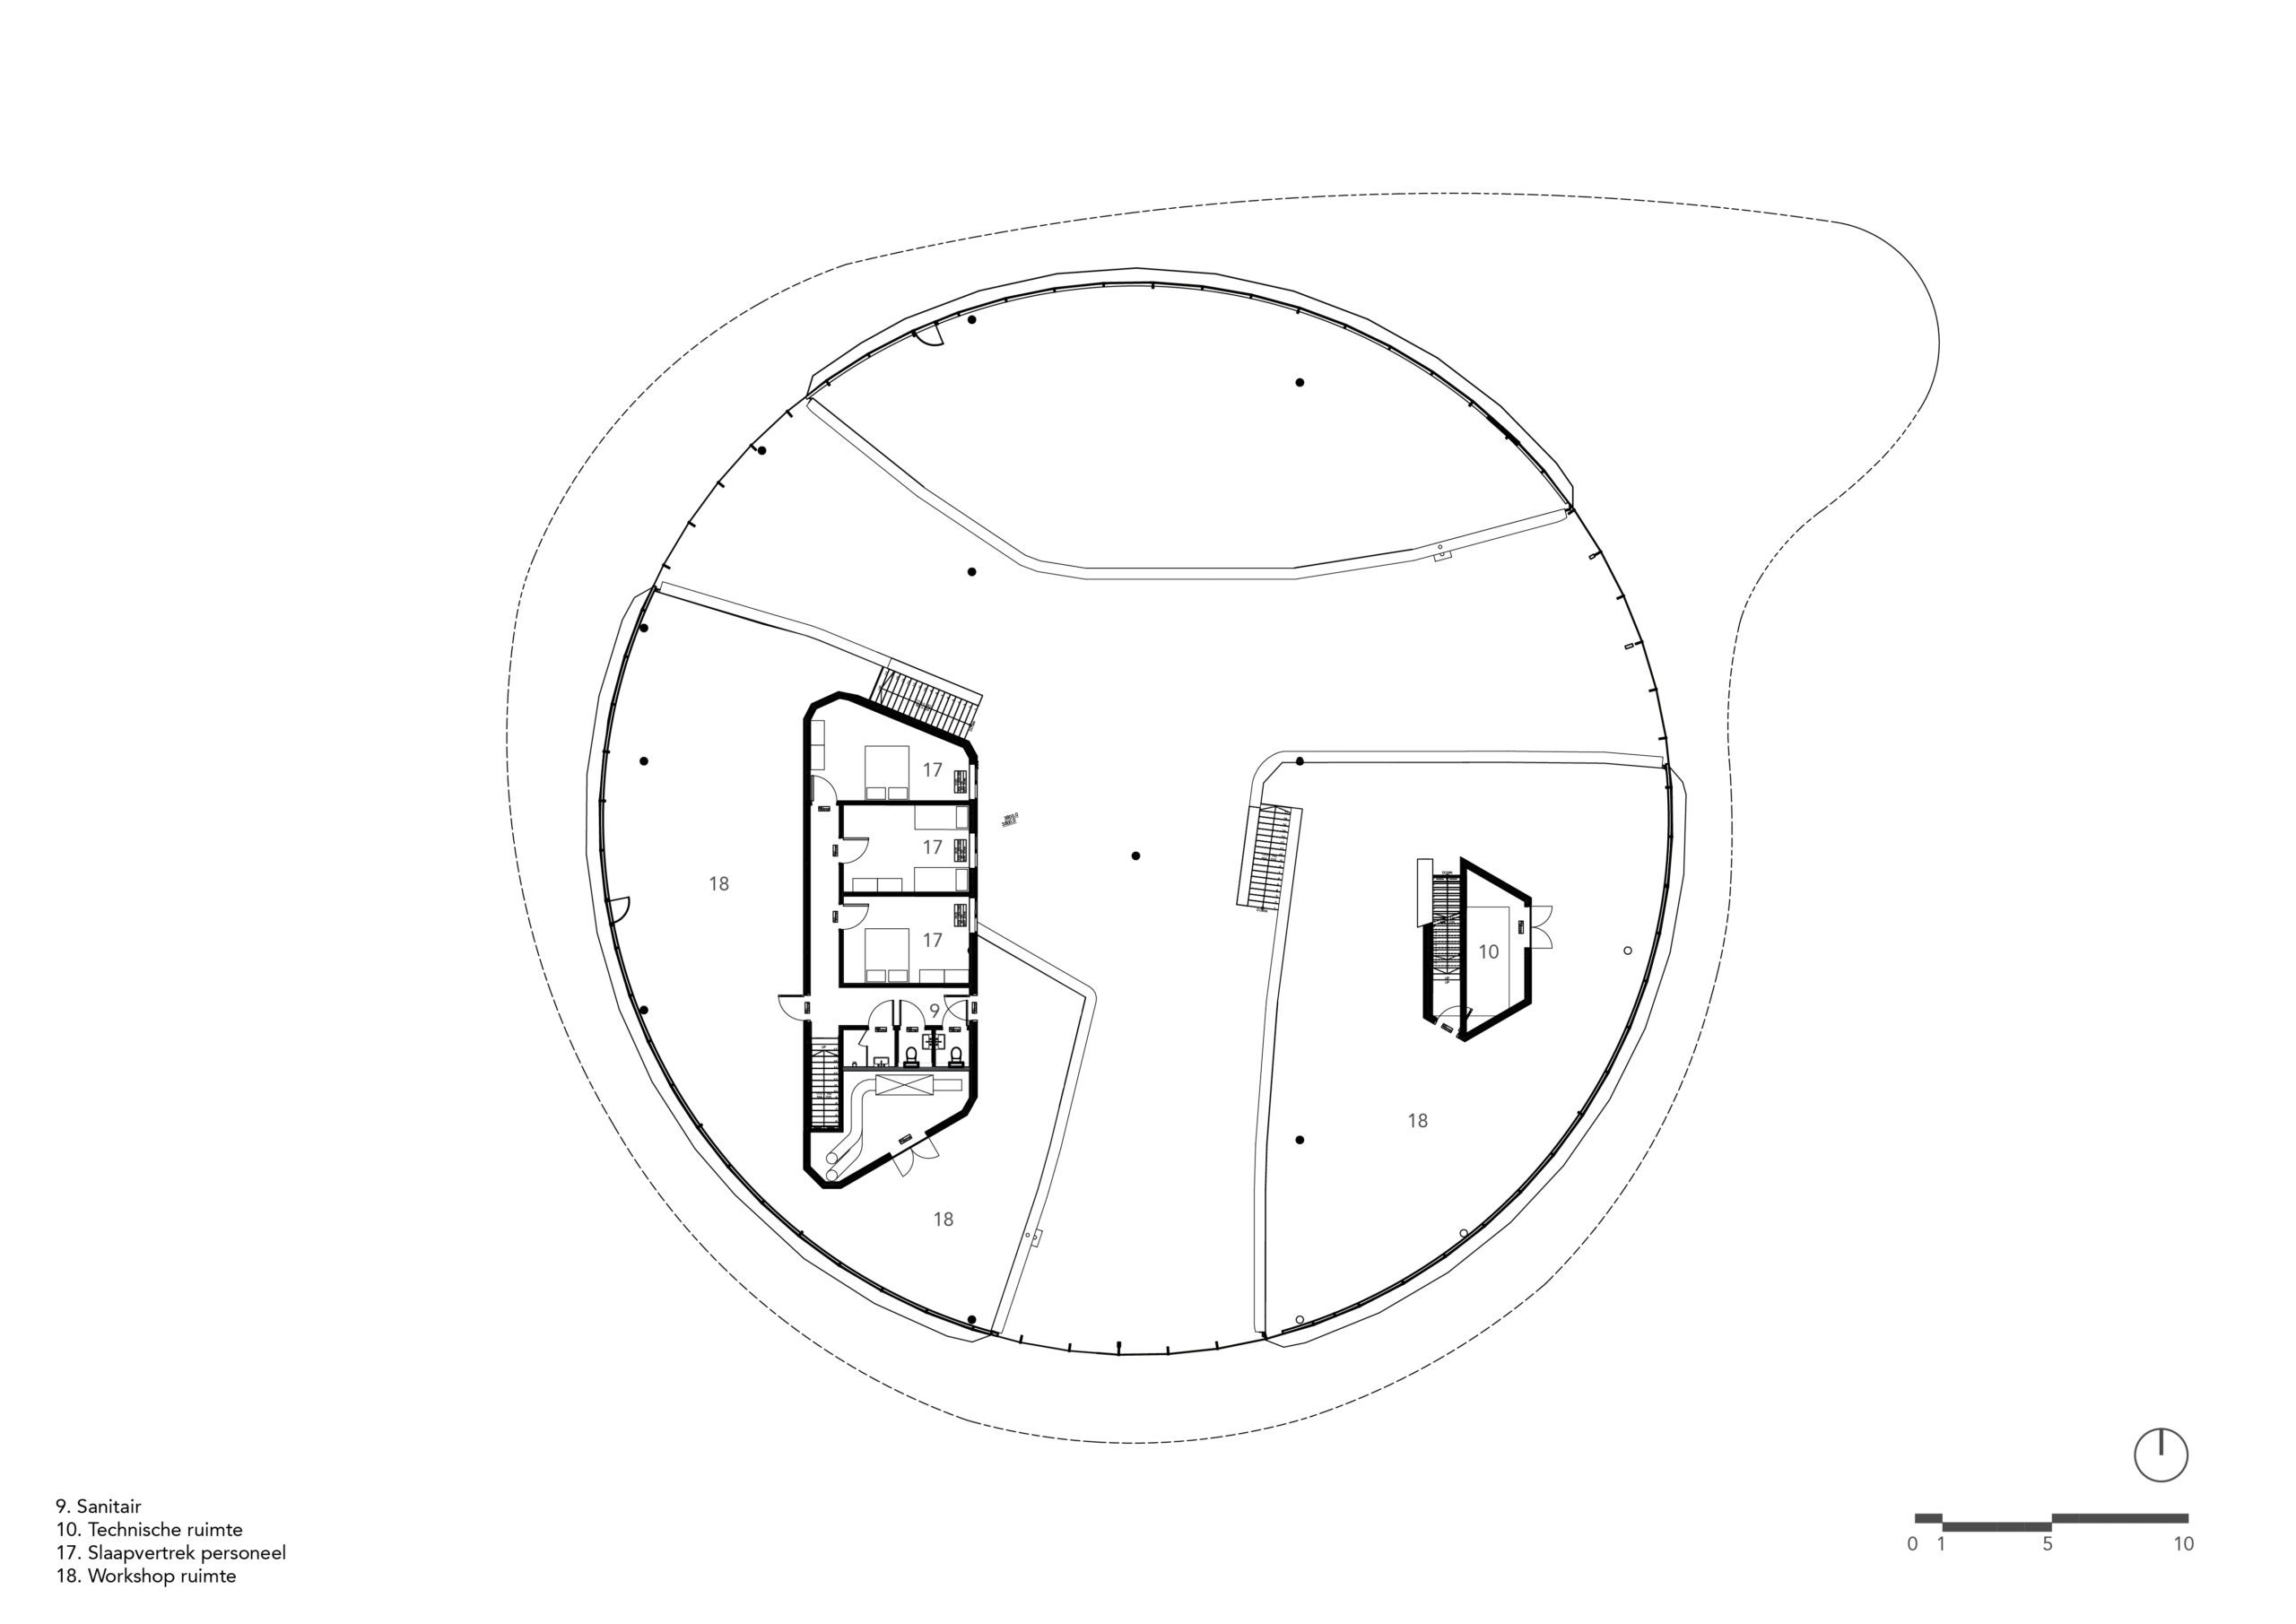 Floorplan drawing of the first floor of the Avonturenhuis a design by MOST Architecture Rotterdam